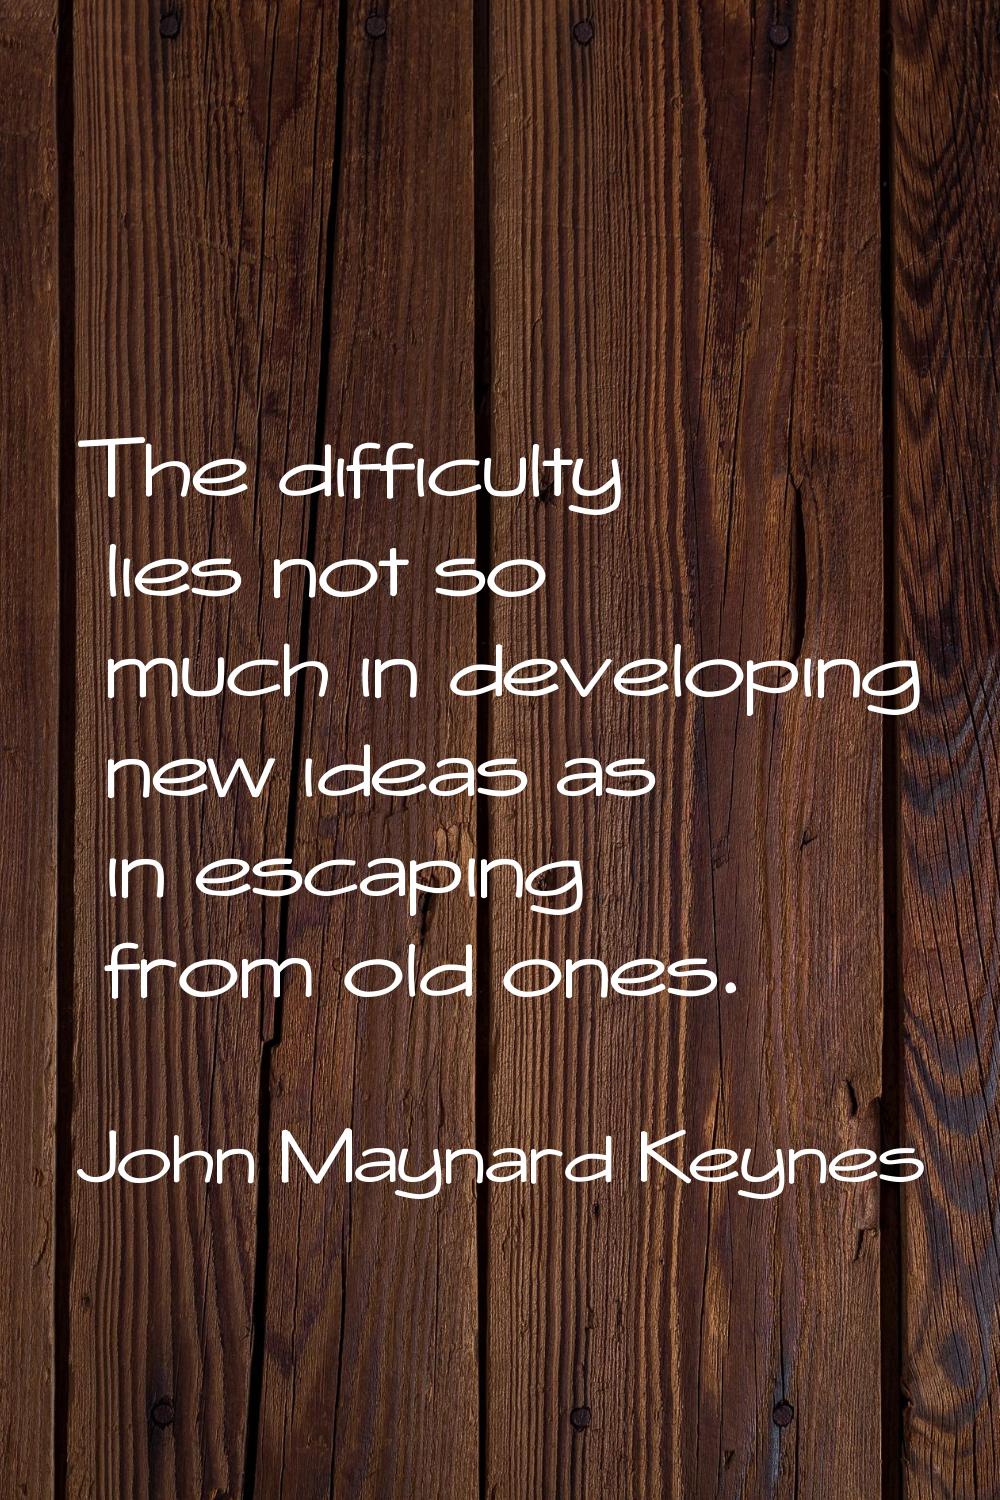 The difficulty lies not so much in developing new ideas as in escaping from old ones.